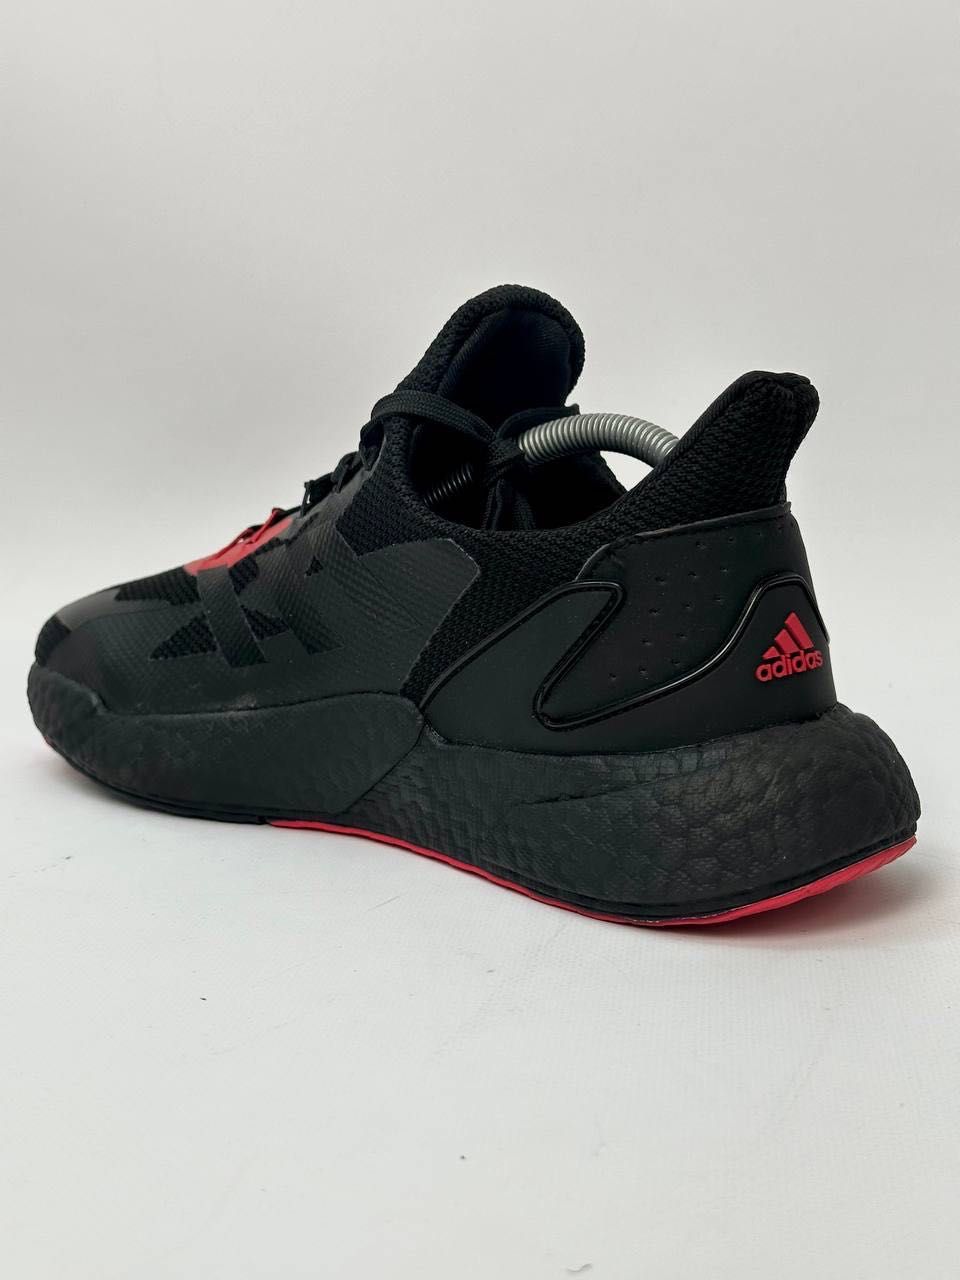 Кросівки Adidas X9000 L3 CORE black/red made in Vietnam